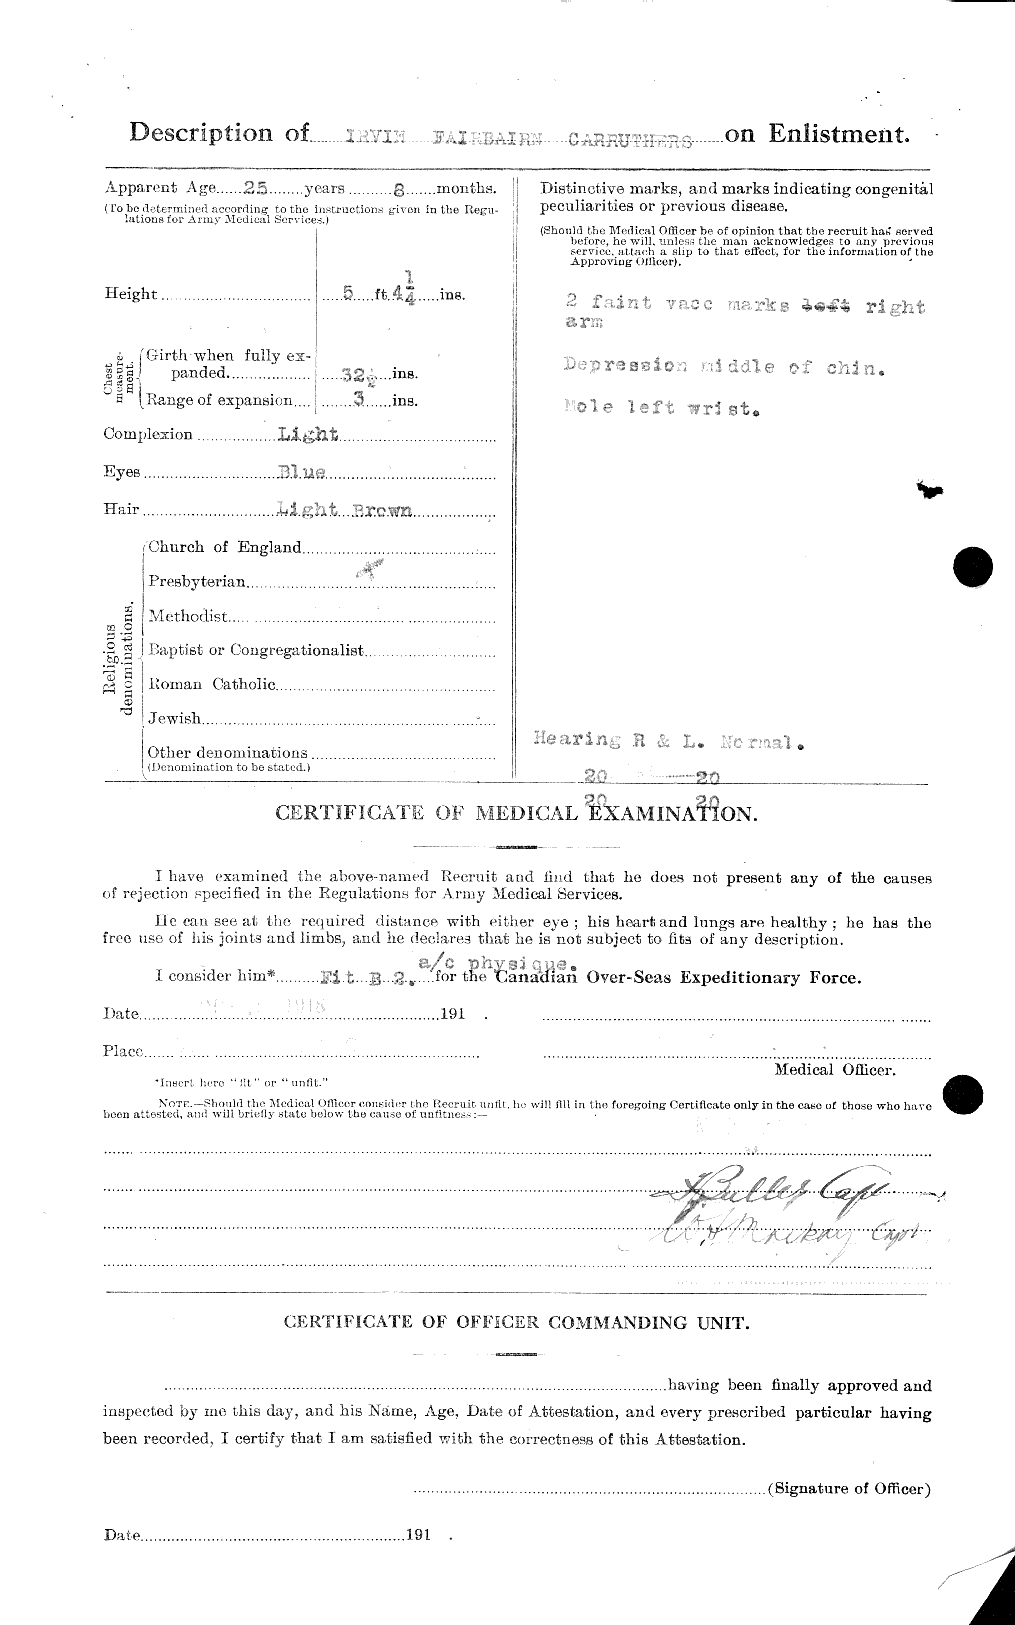 Personnel Records of the First World War - CEF 010691b